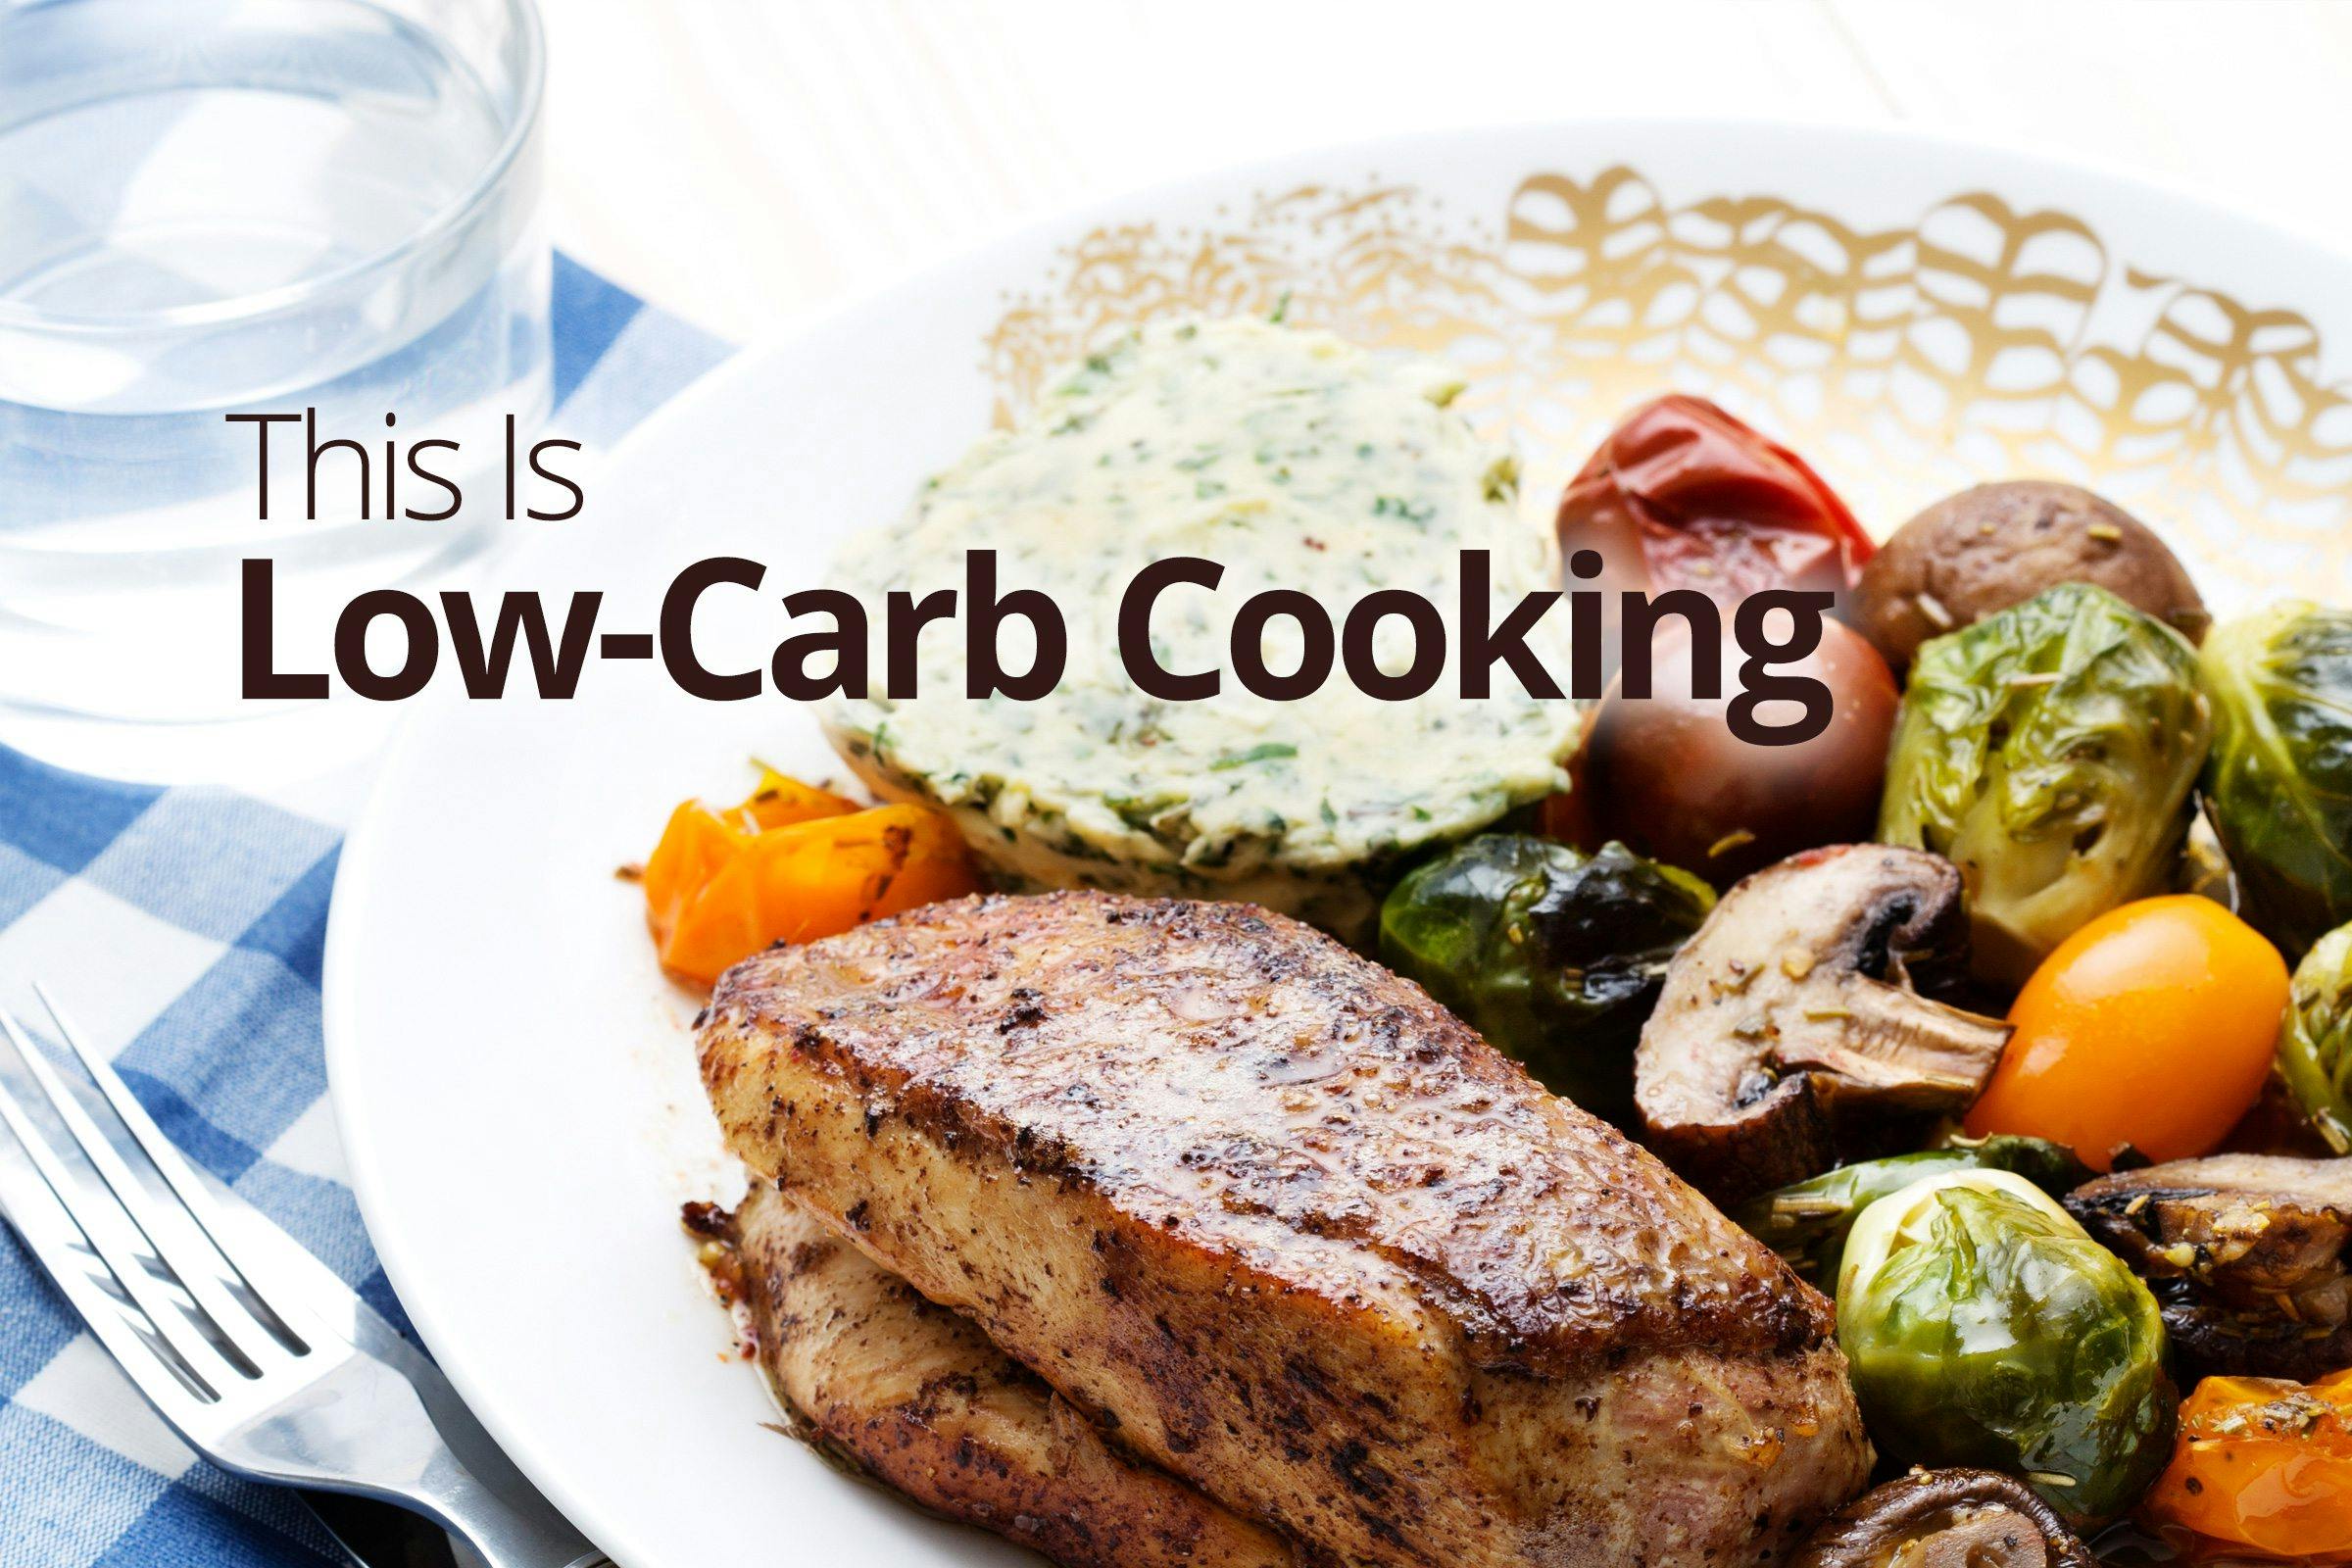 Low carb for doctors introduction Diet Doctor Dr unwin low carb